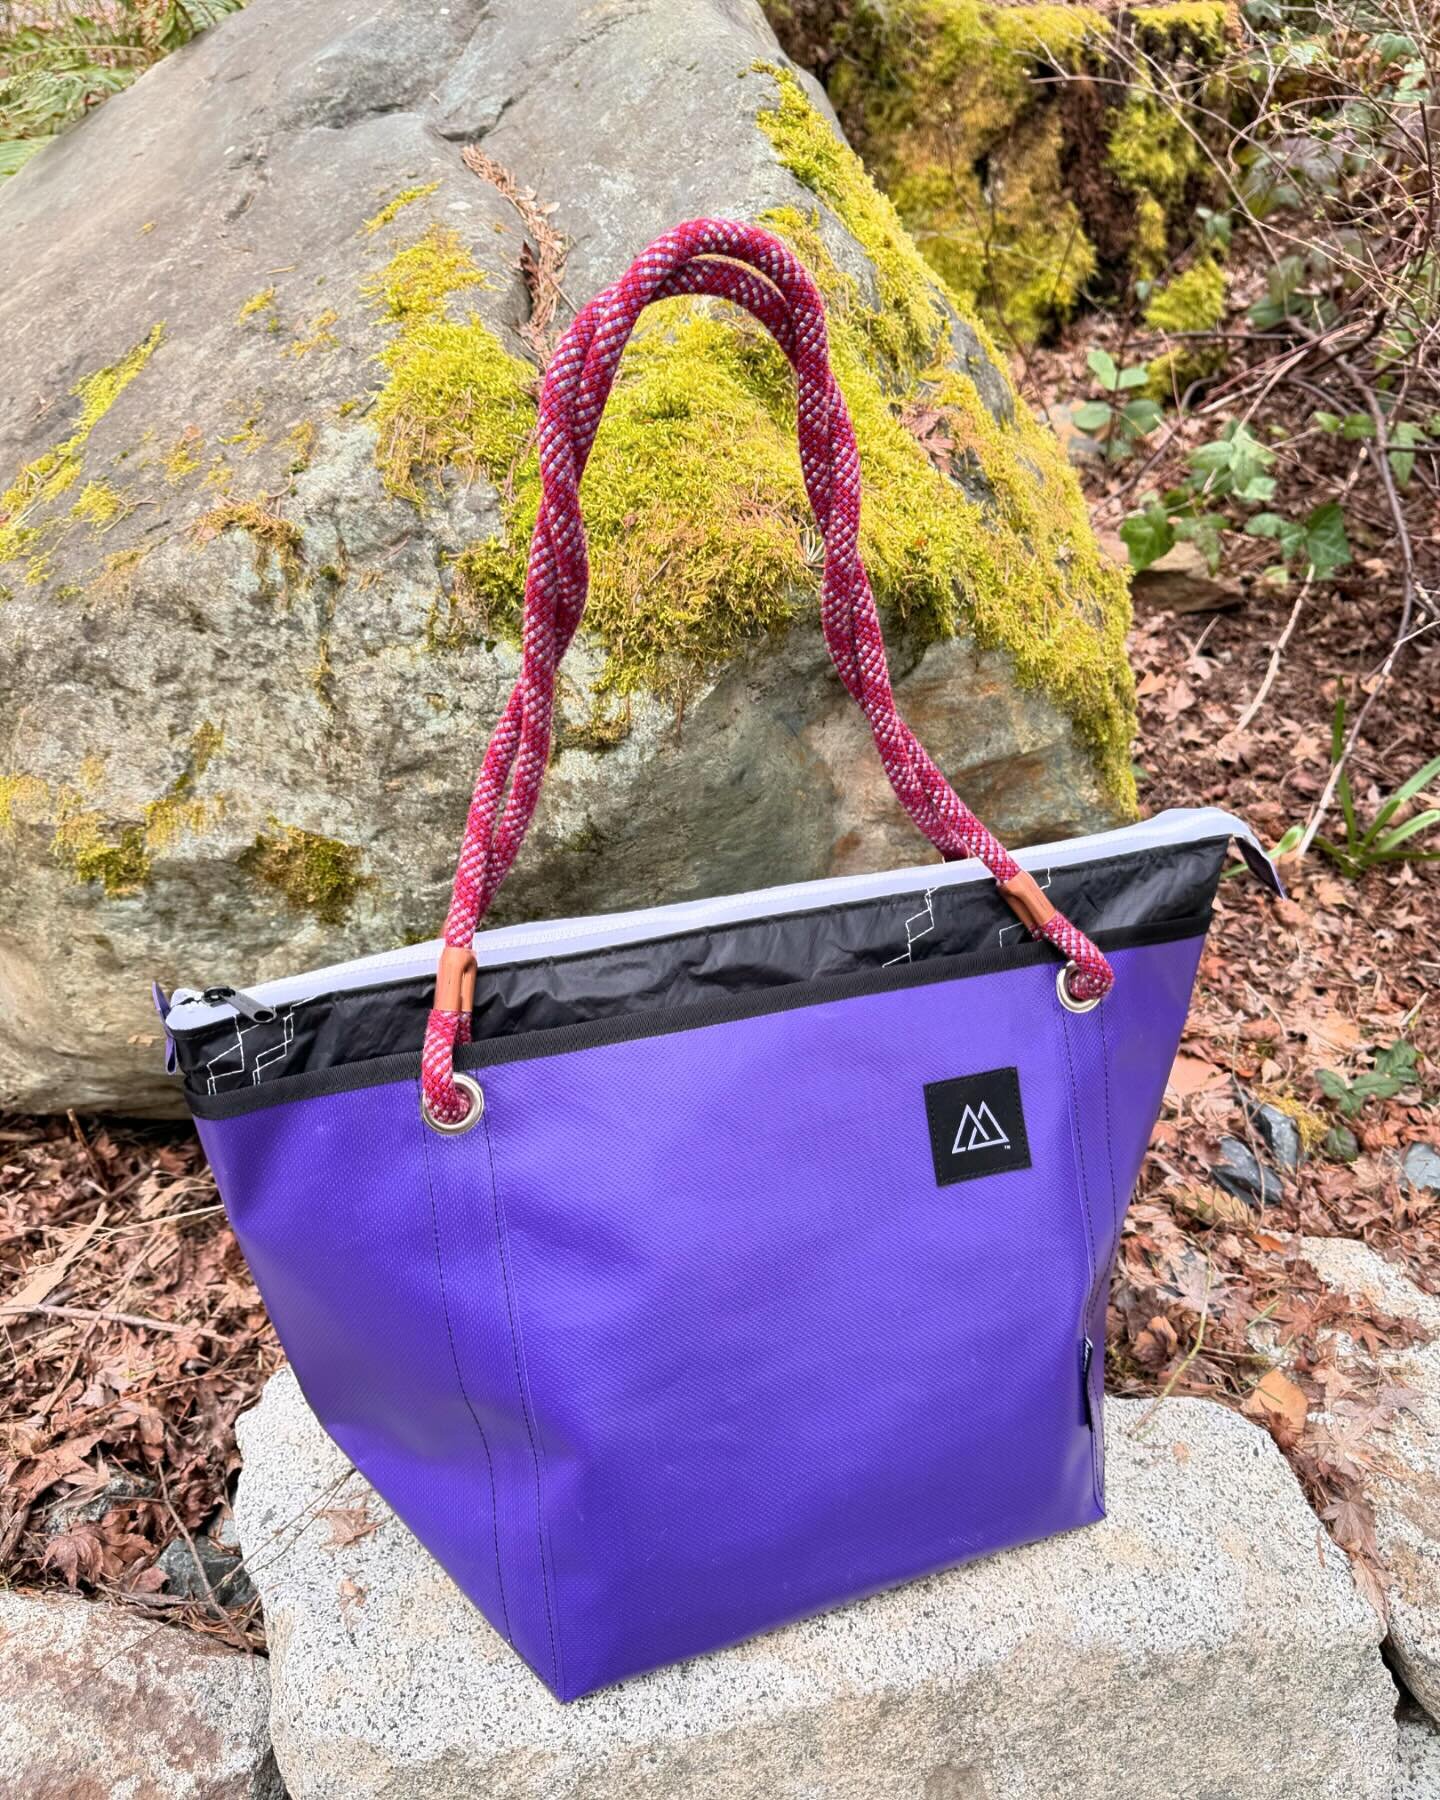 Happy International Women&rsquo;s Day! 
To celebrate this important day, we have released a brand new marble deluxe tote! ♻️ Our totes are locally made from sustainable materials, and are ready to accompany the amazing women we are celebrating in any